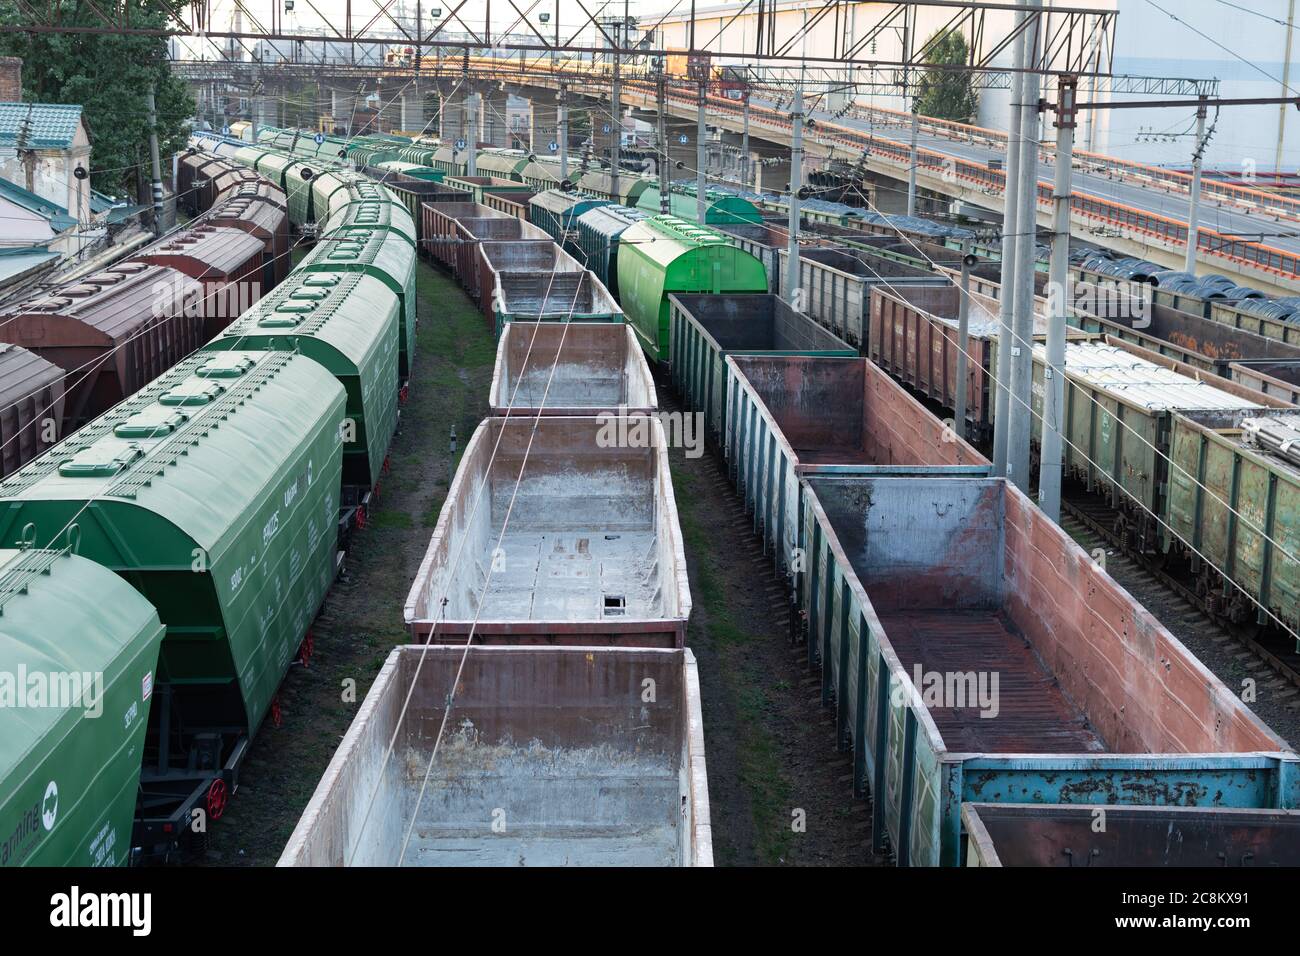 Top view of rail sorting freight station with freight cars, with many rail tracks railroad. Heavy industry landscape. Stock Photo